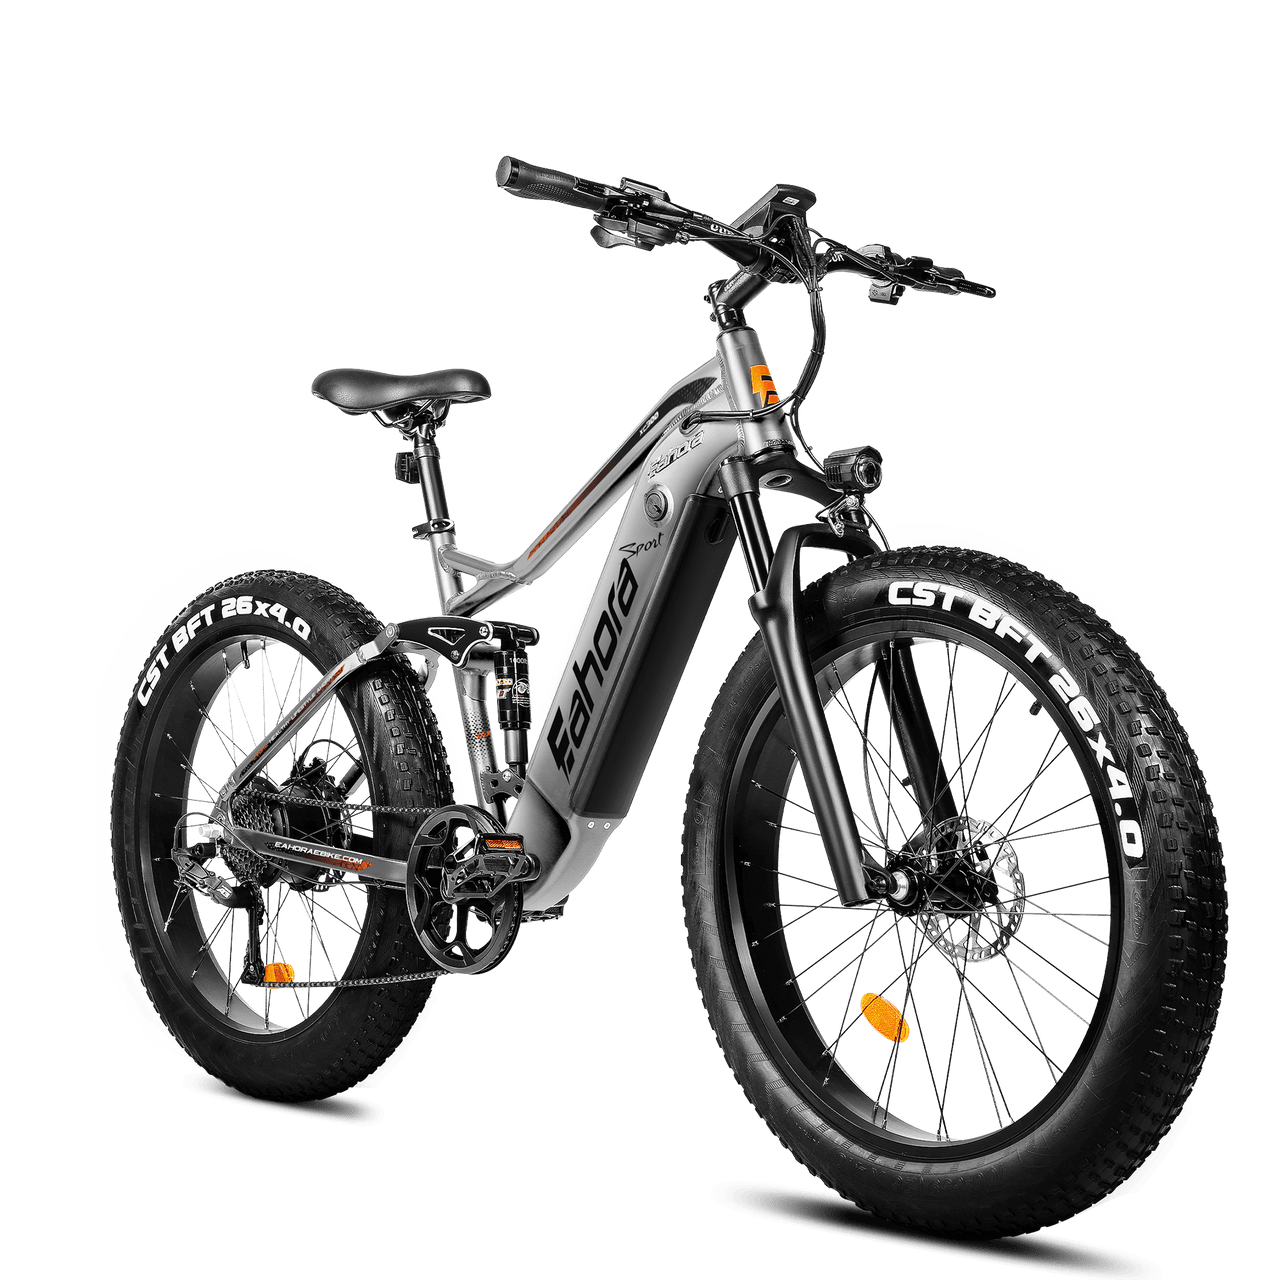 best-prices-get-great-savings-x5-pro-500w-fat-tire-fg-e-br-a-dual